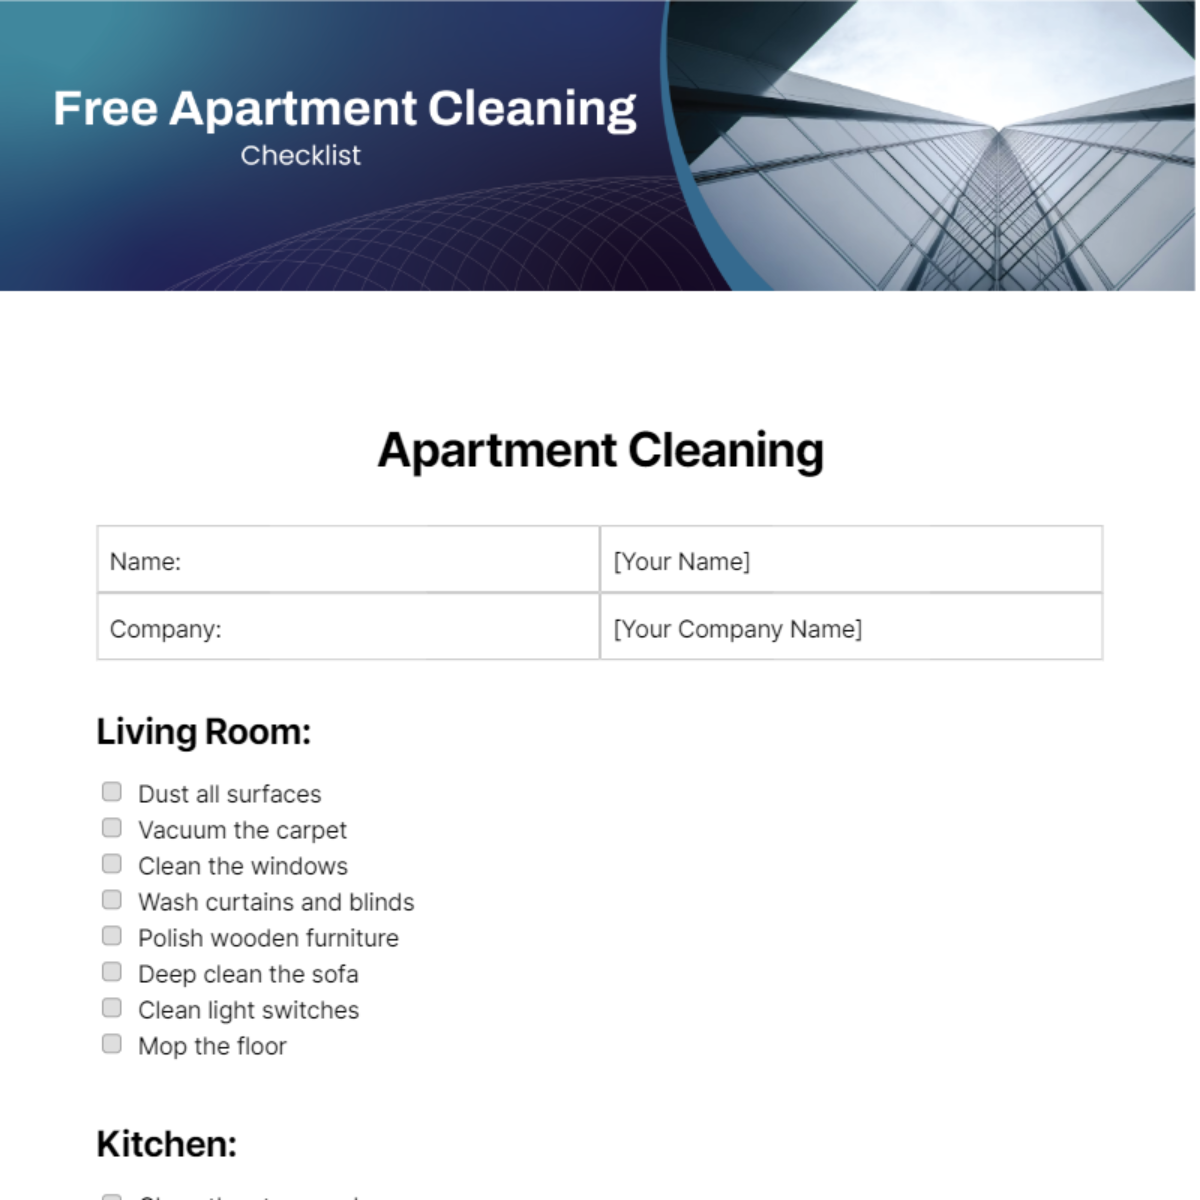 Free Apartment Cleaning Checklist Template